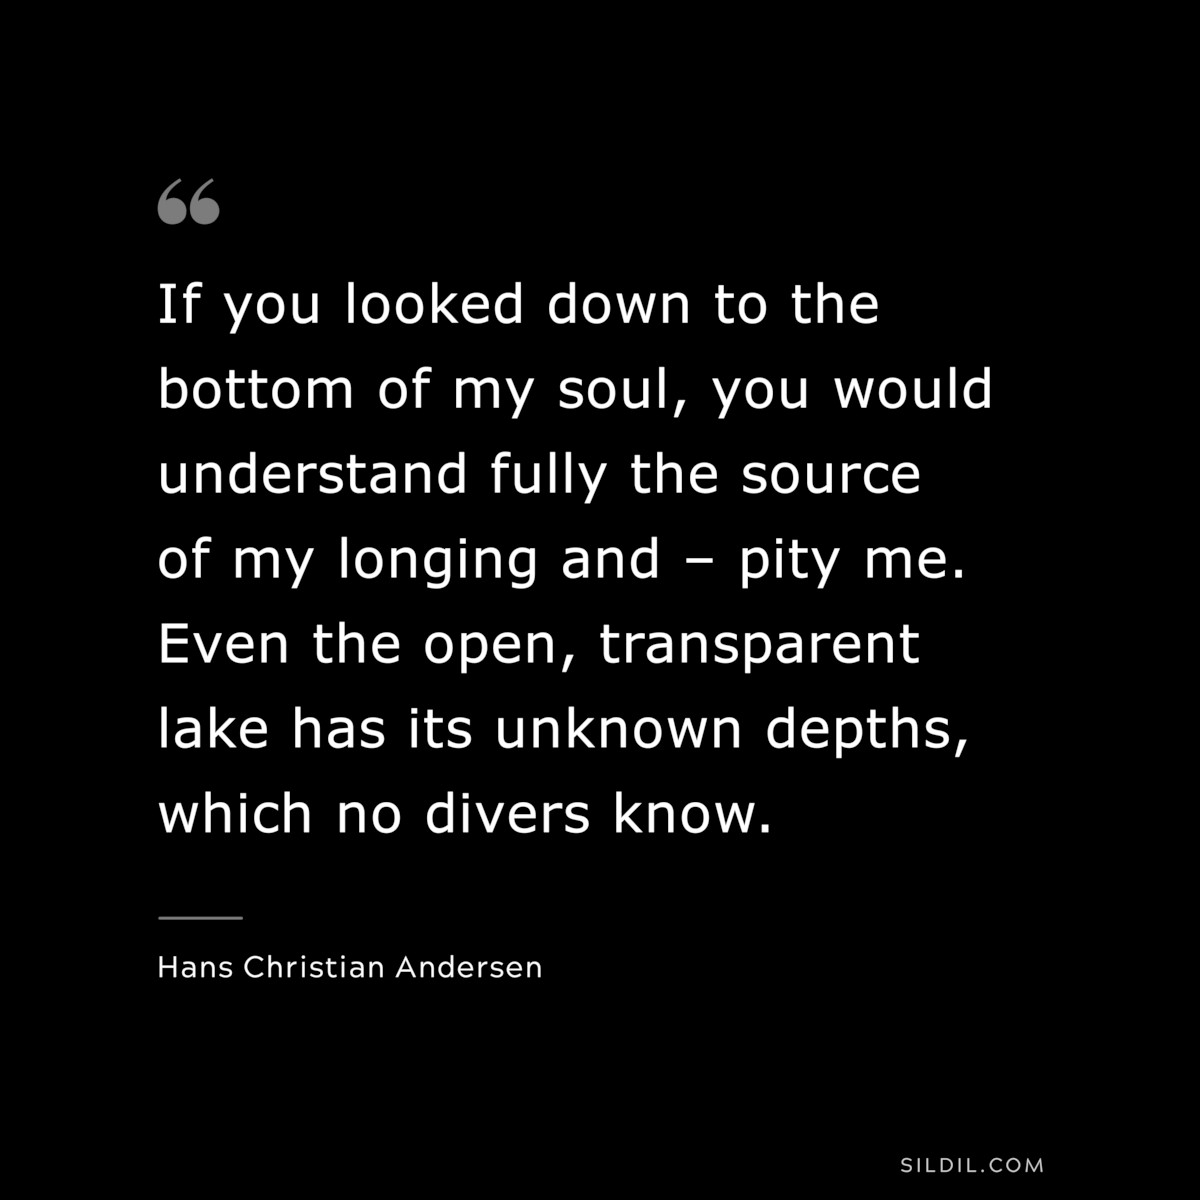 If you looked down to the bottom of my soul, you would understand fully the source of my longing and – pity me. Even the open, transparent lake has its unknown depths, which no divers know. ― Hans Christian Andersen